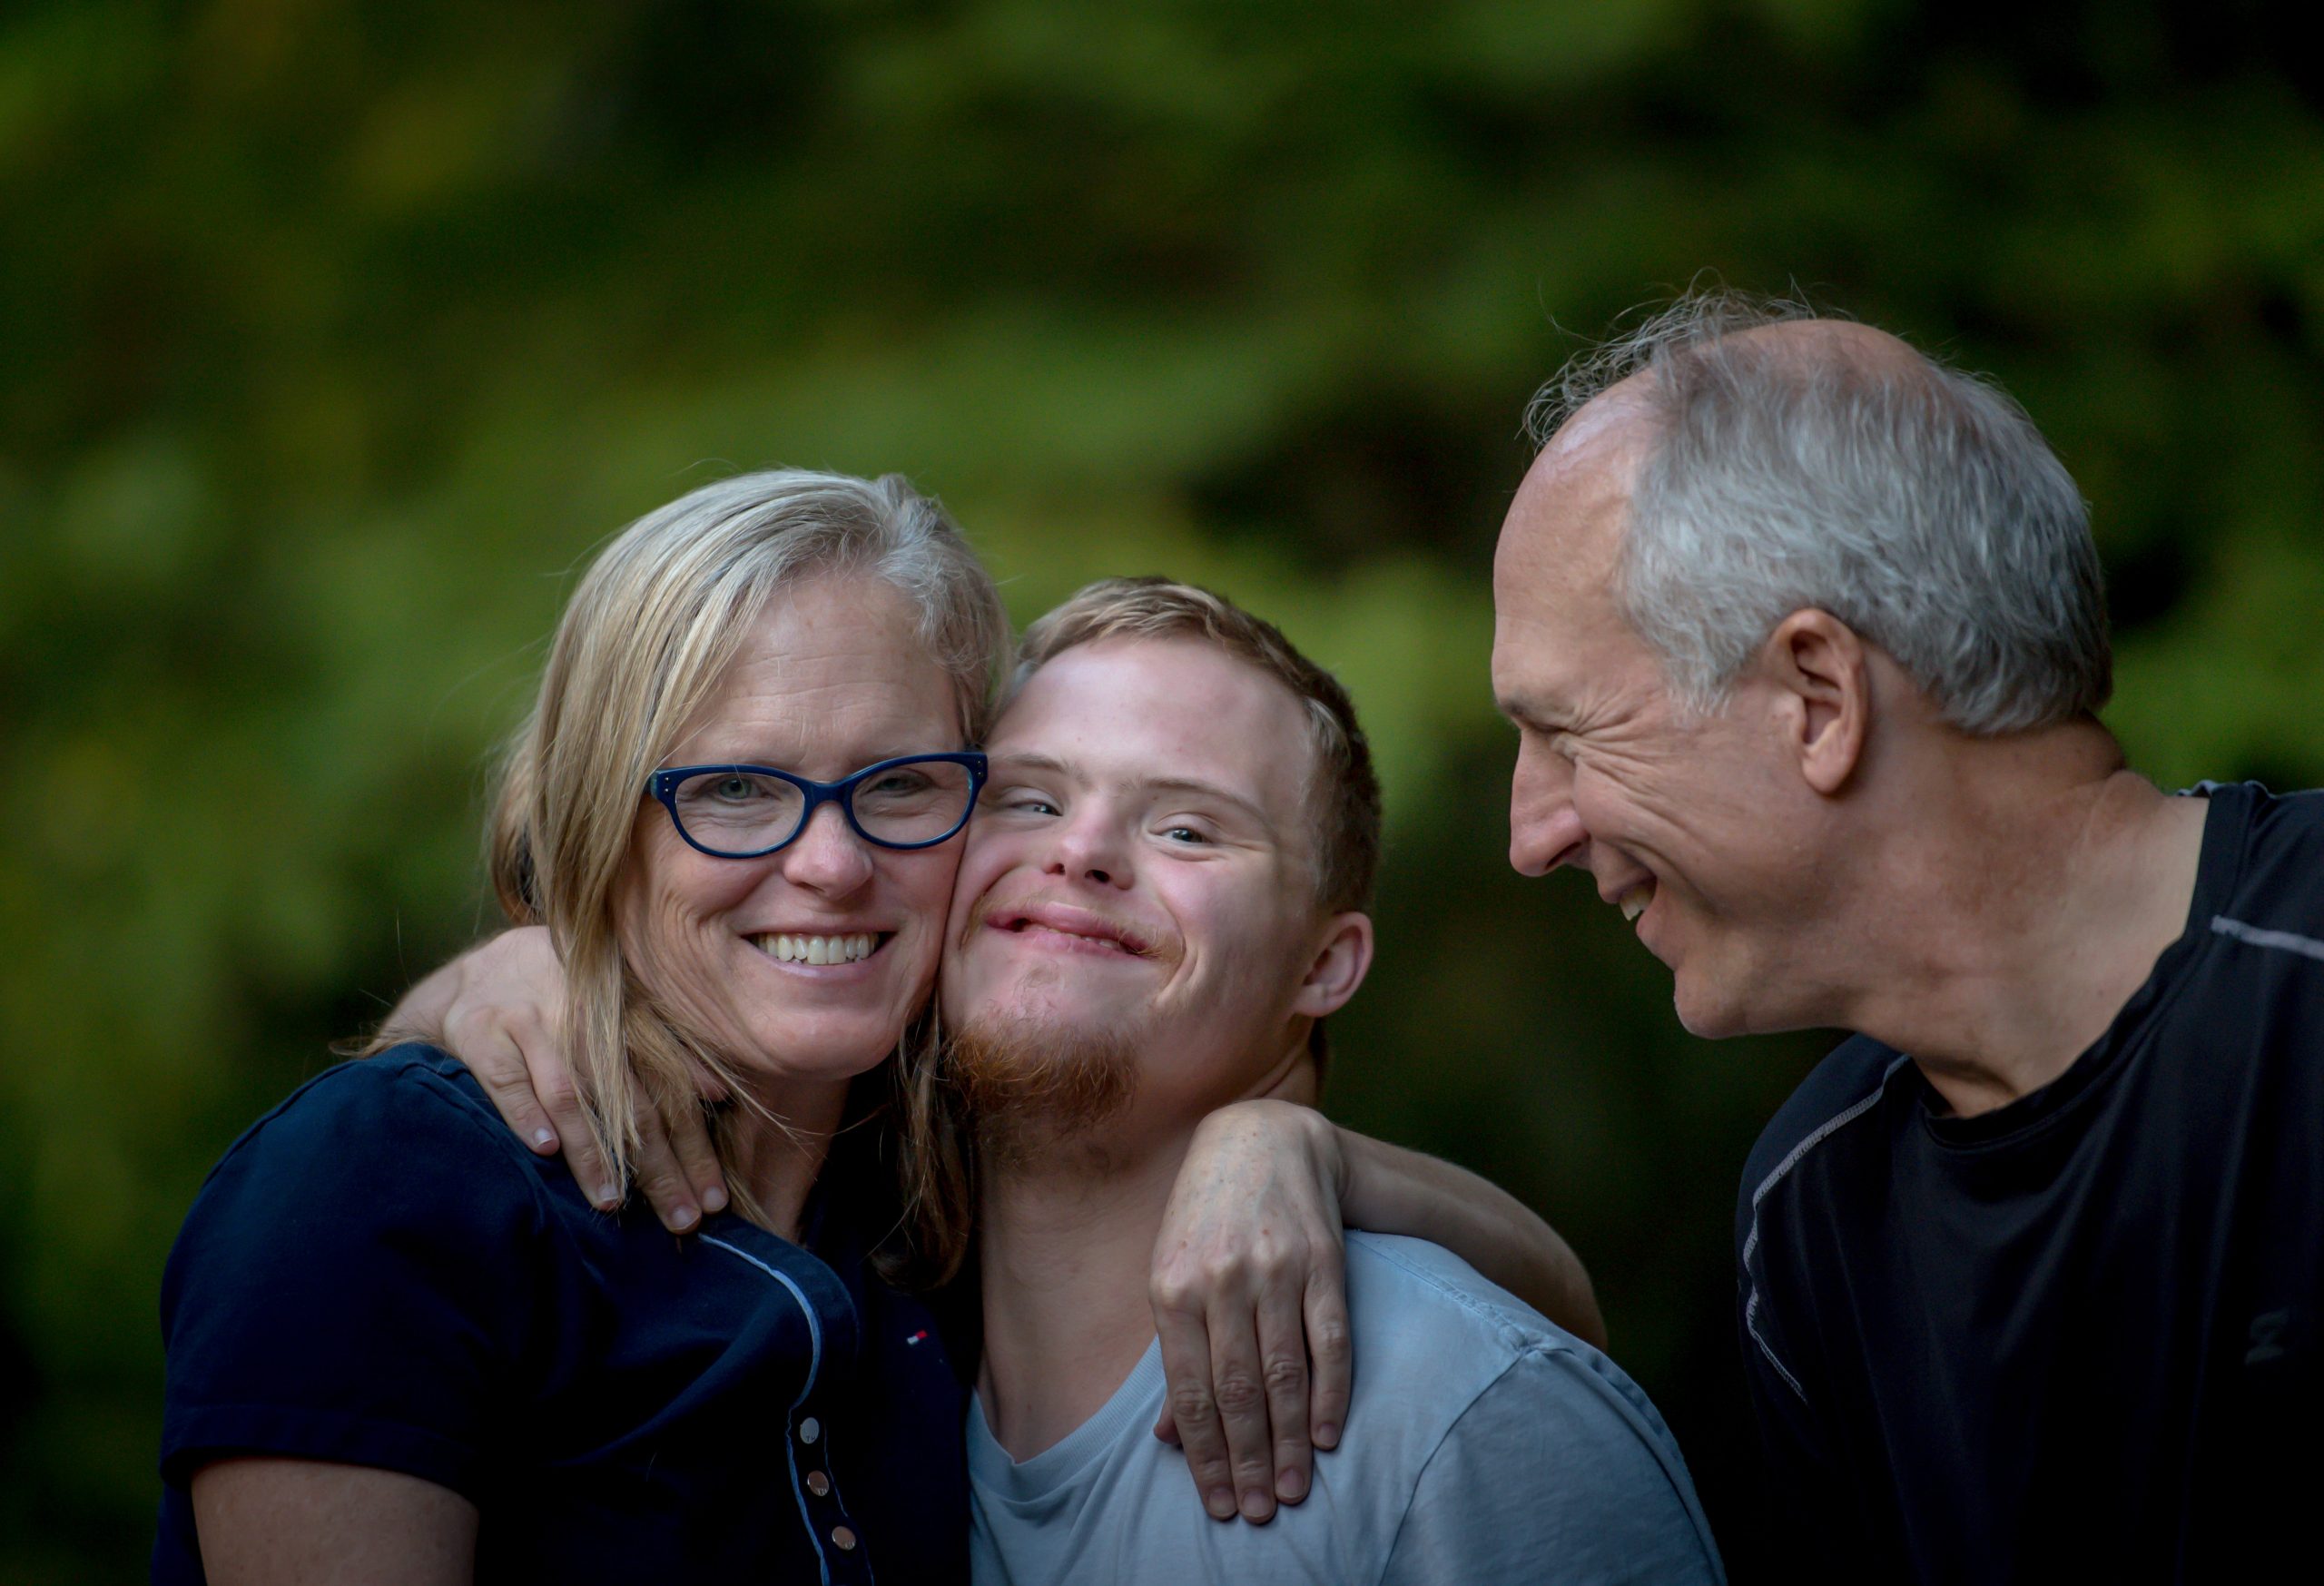 Image shows a family comprised of a woman (mom), a young adult with Down Syndrome and a man (dad).